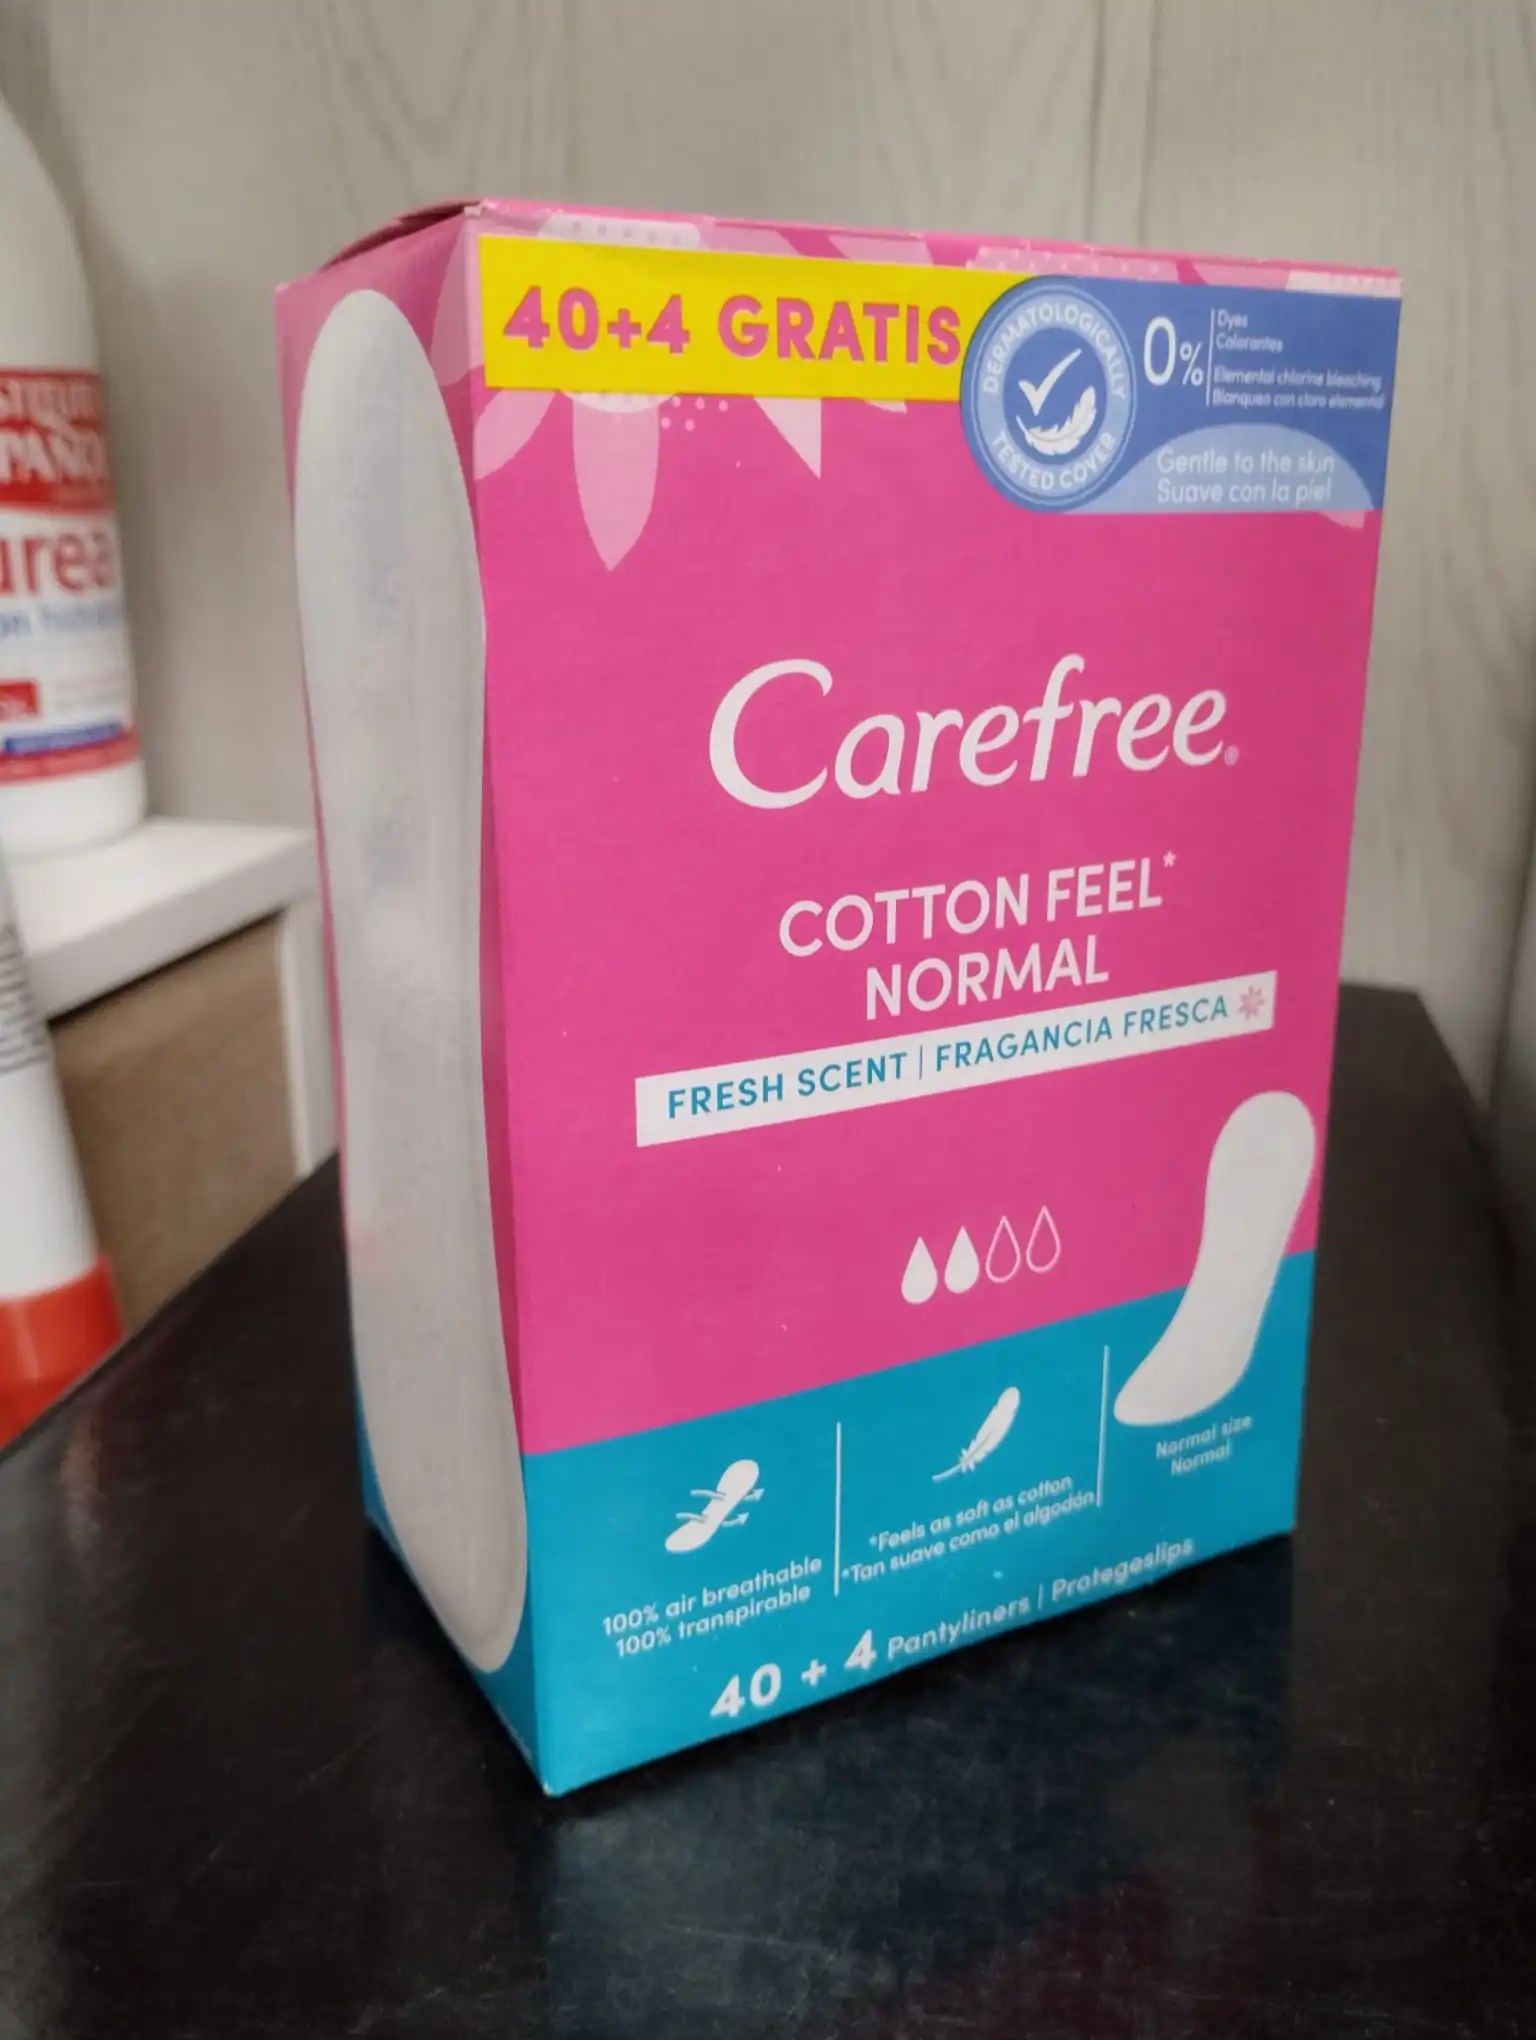 CAREFREE COTTON FEEL NORMAL 40+4